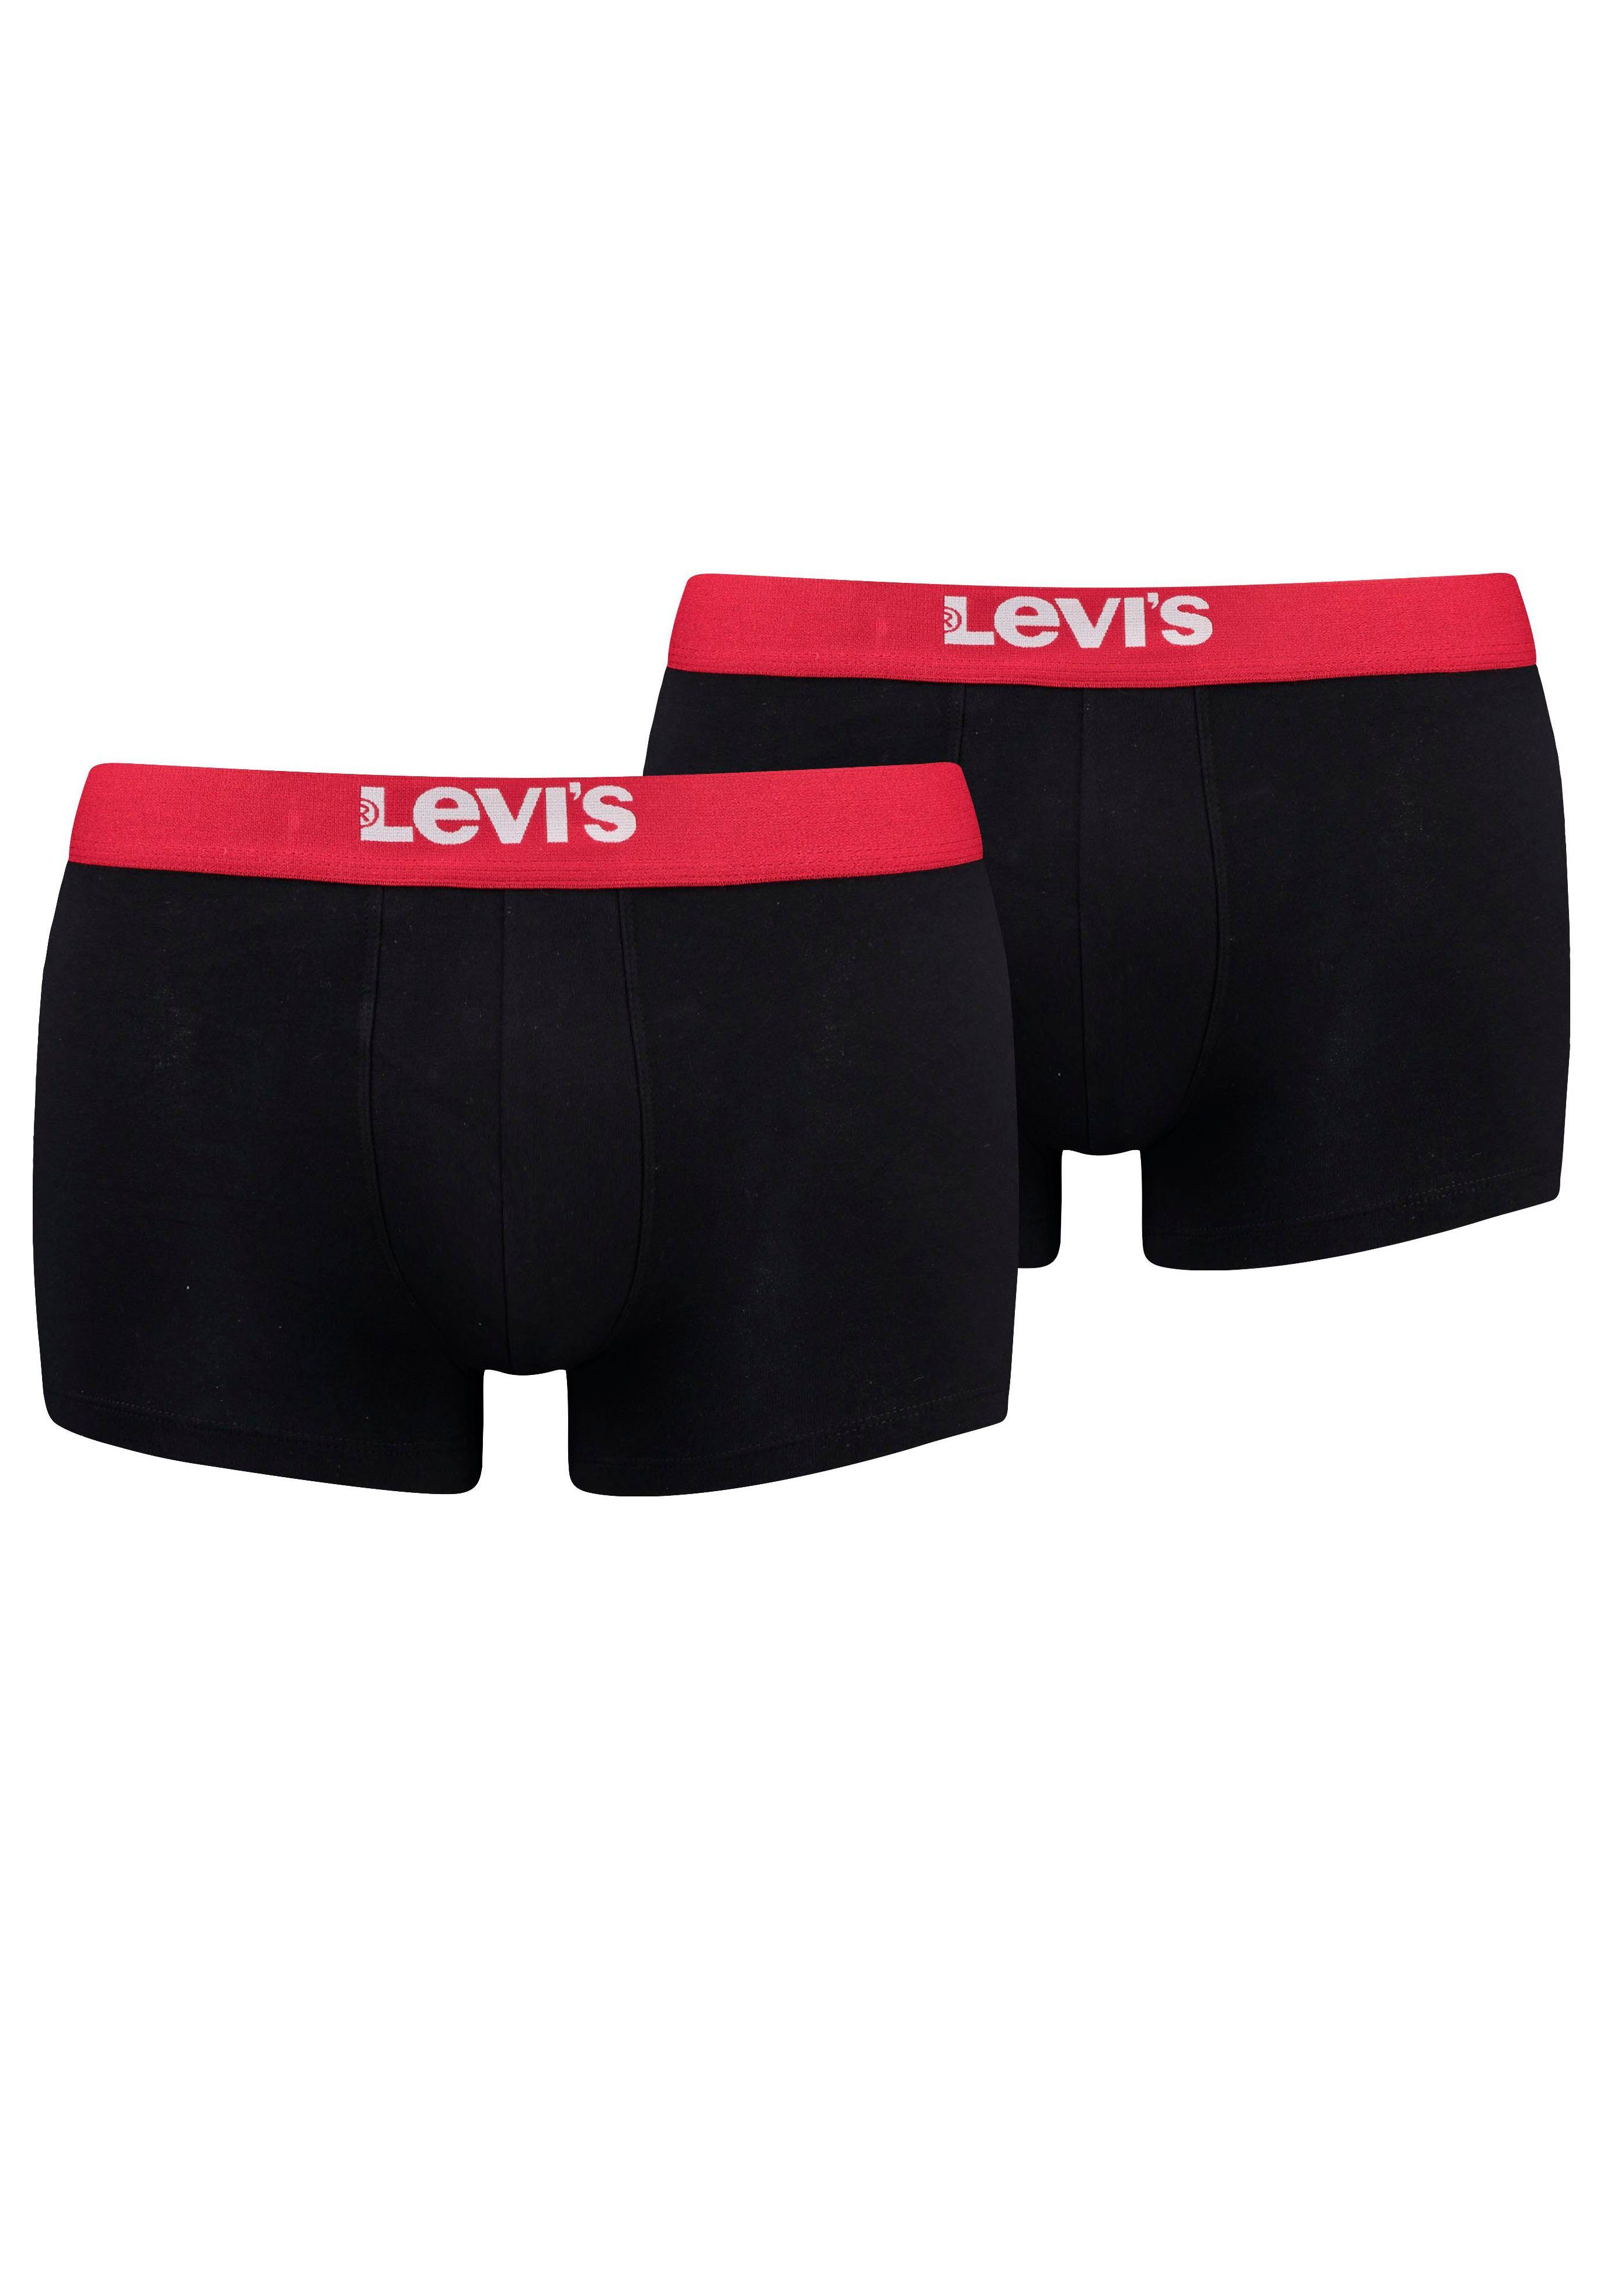 ORGANIC Black/Red LEVIS SOLID CO 2P BASIC MEN Levi's® TRUNK (Packung, Trunk 2-St)